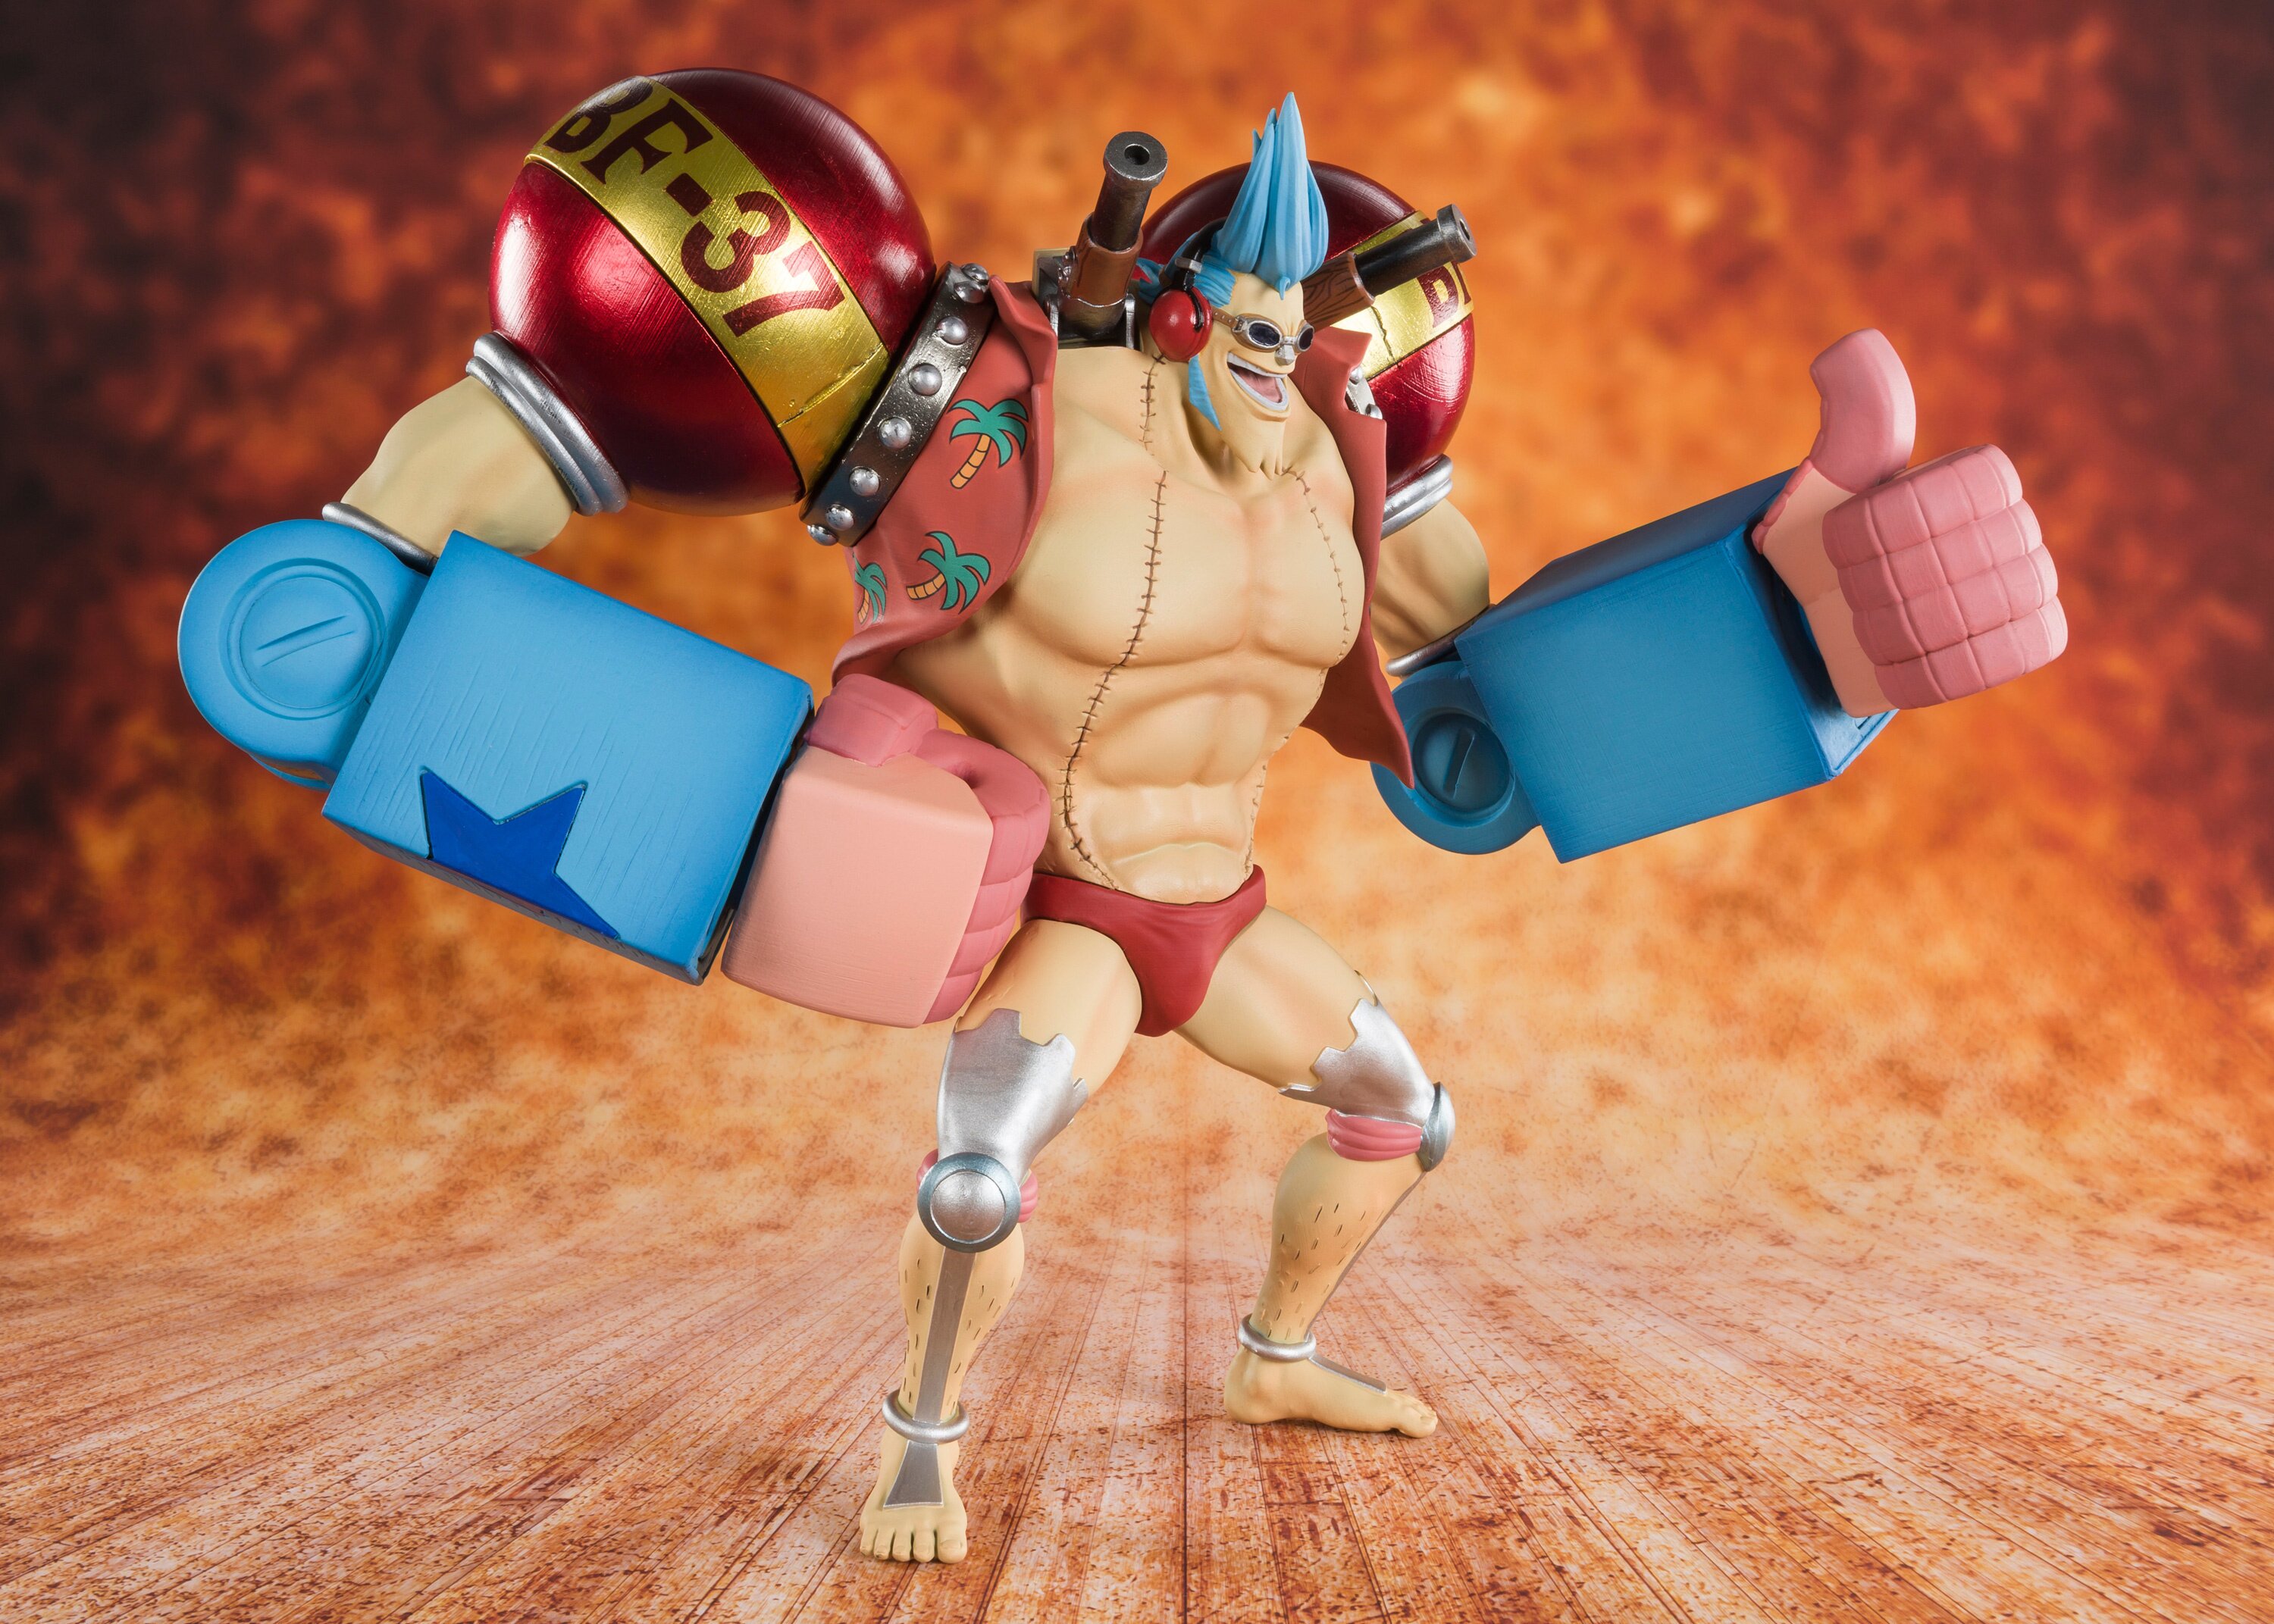 One Piece - Kokoro - One Piece Figure Collection Franky Appearance (FC5)  (Bandai)